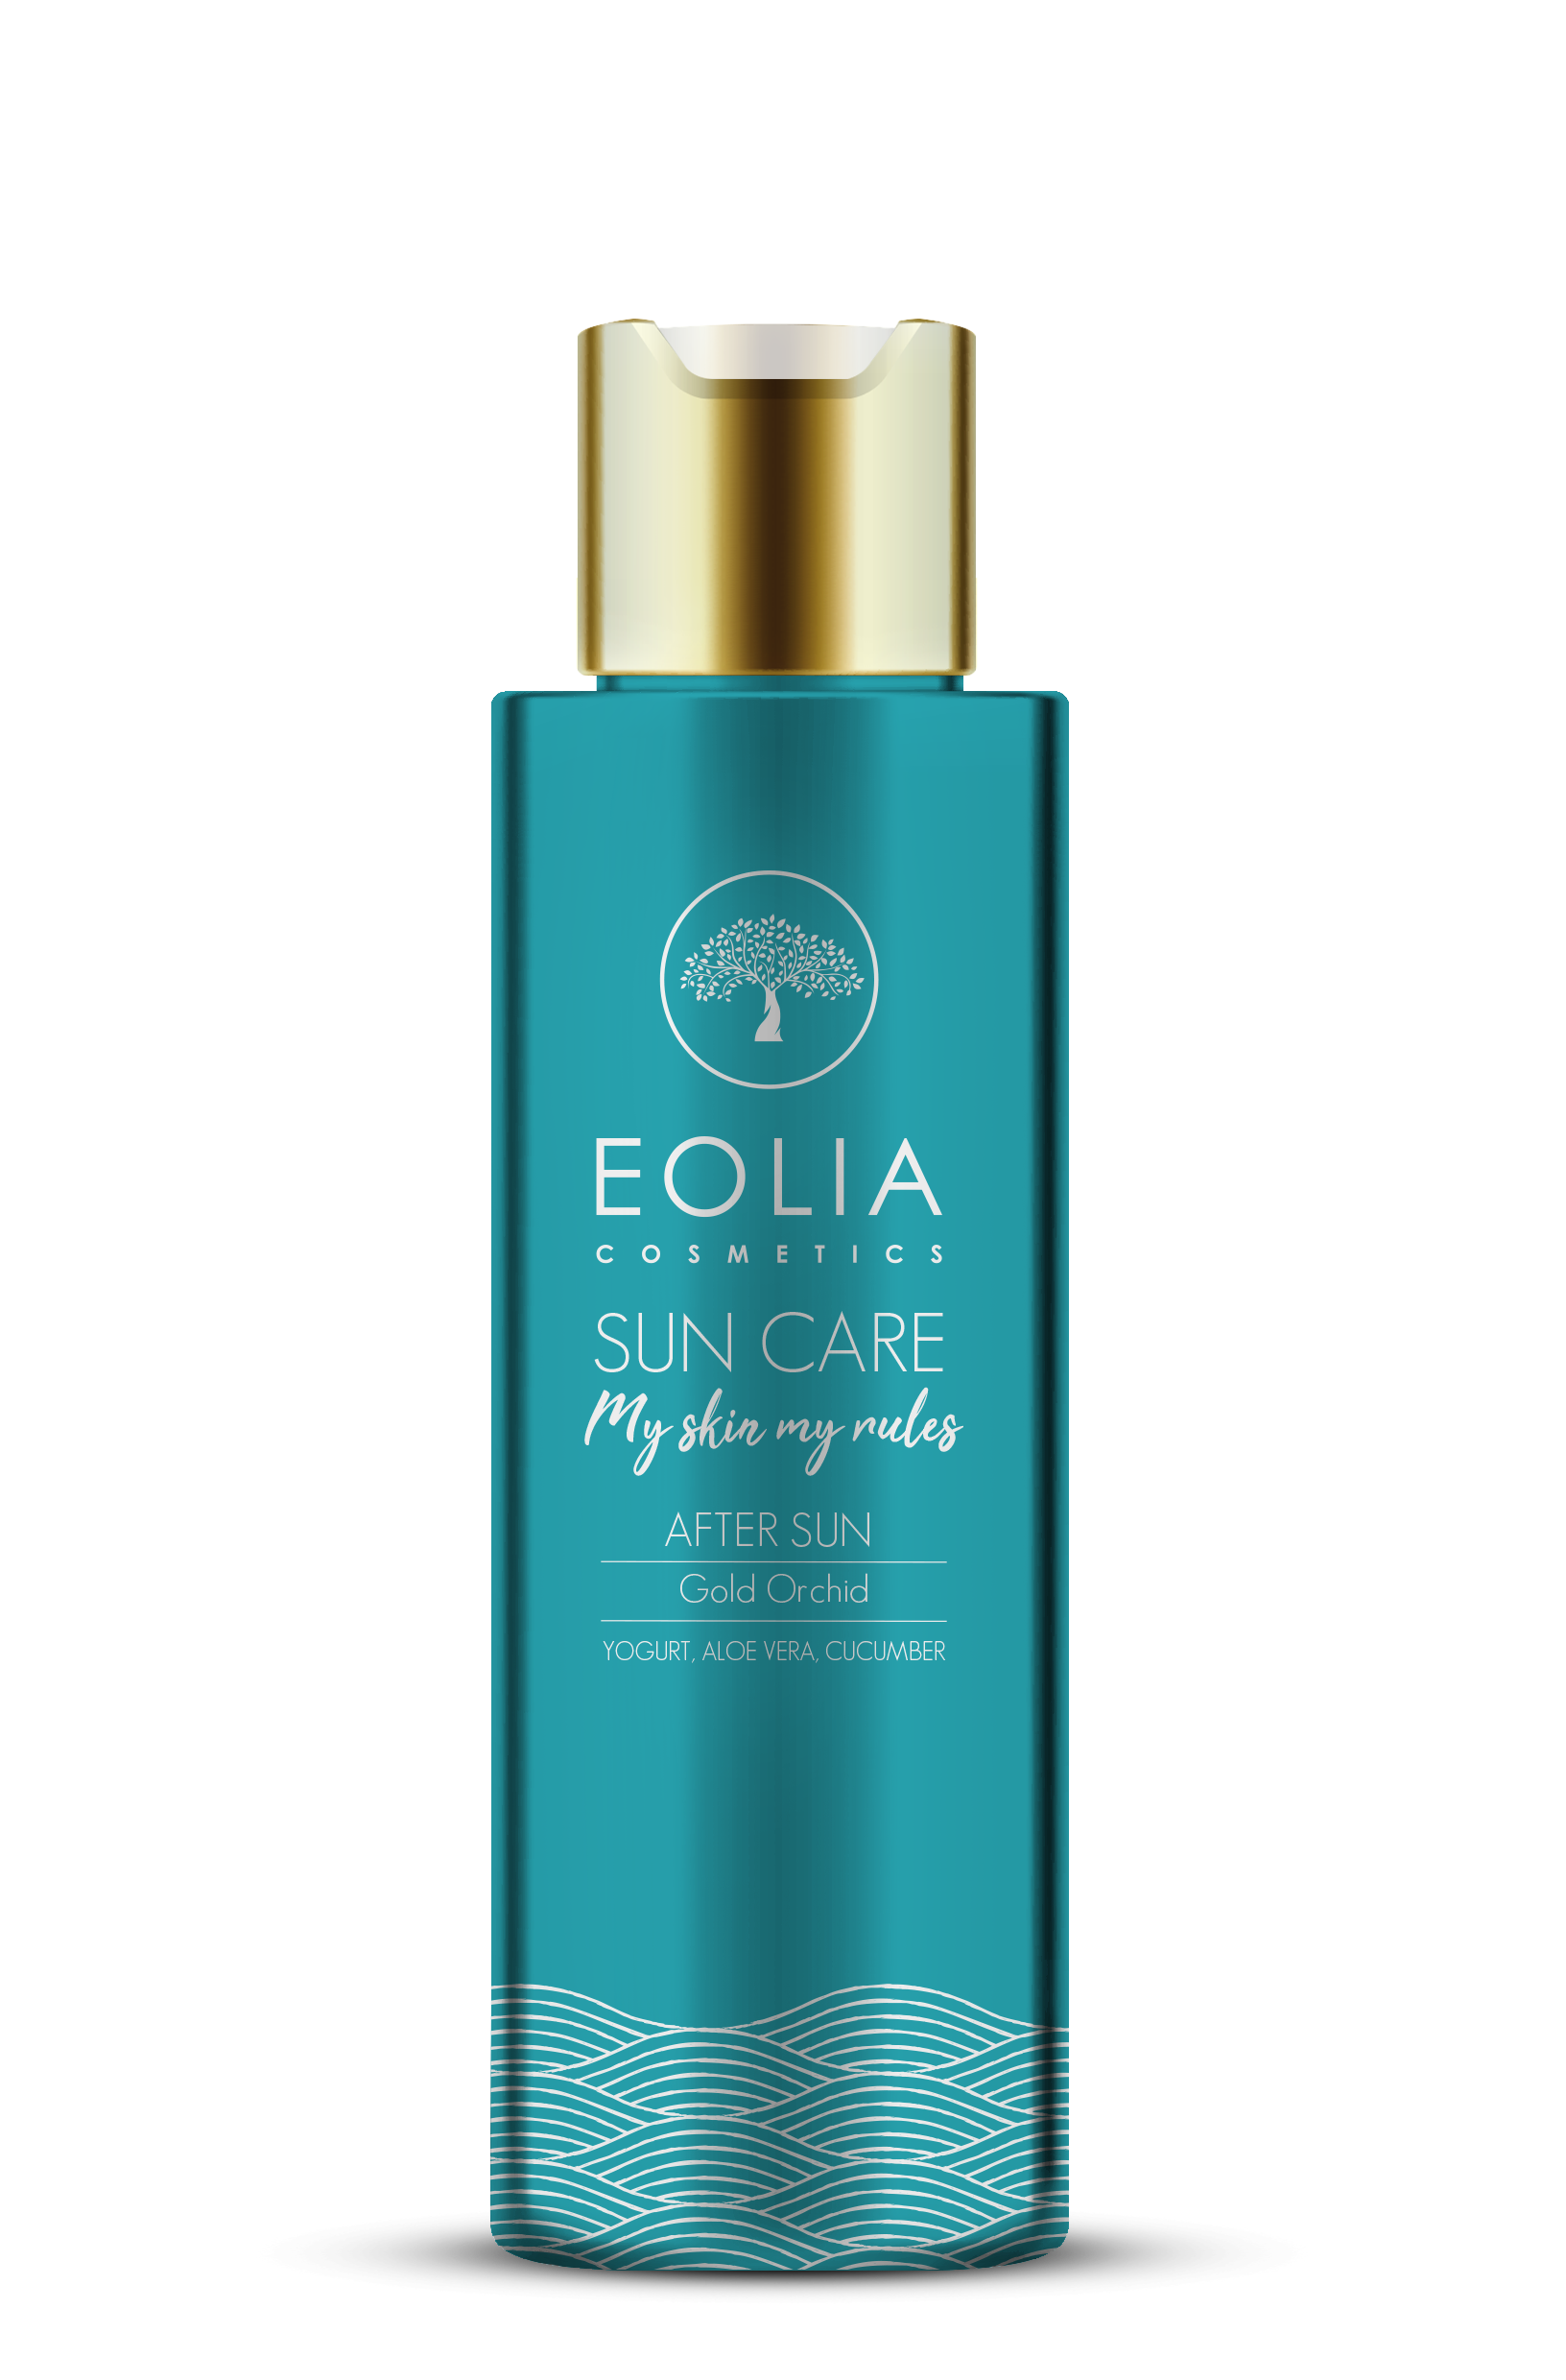 EOLIA COSMETICS SUN CARE MY SKIN MY RULES AFTER SUN COOLING GOLD ORCHID 5213004372386